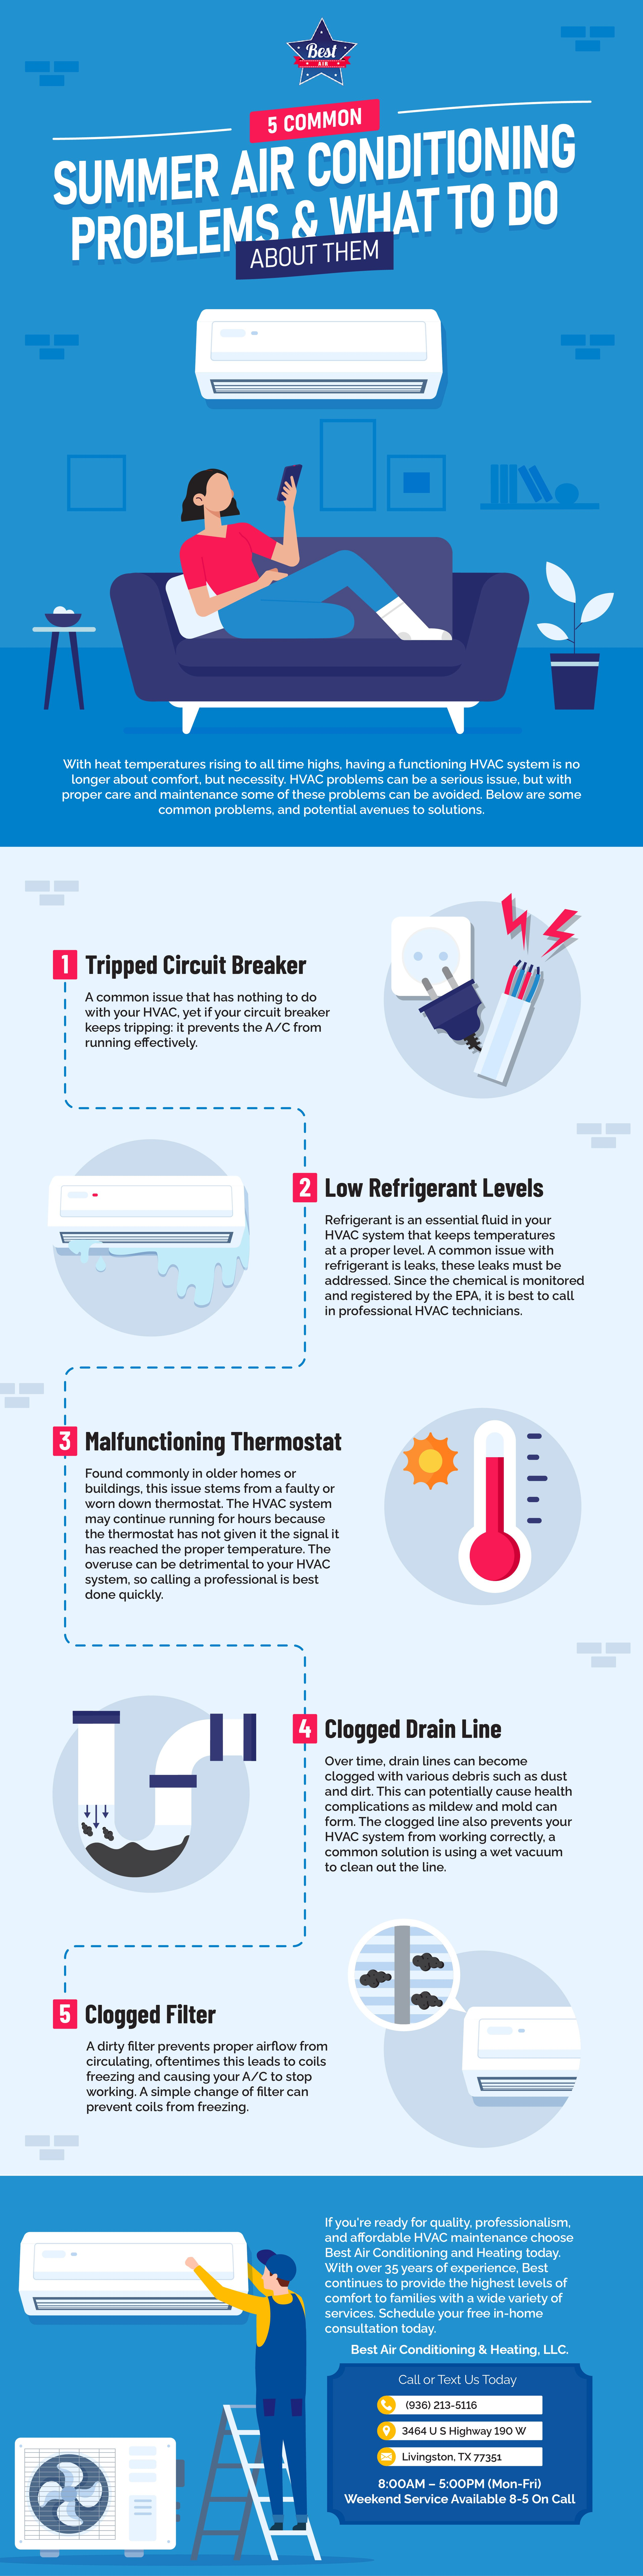 Summer AC Problems and What To Do About Them Infographic